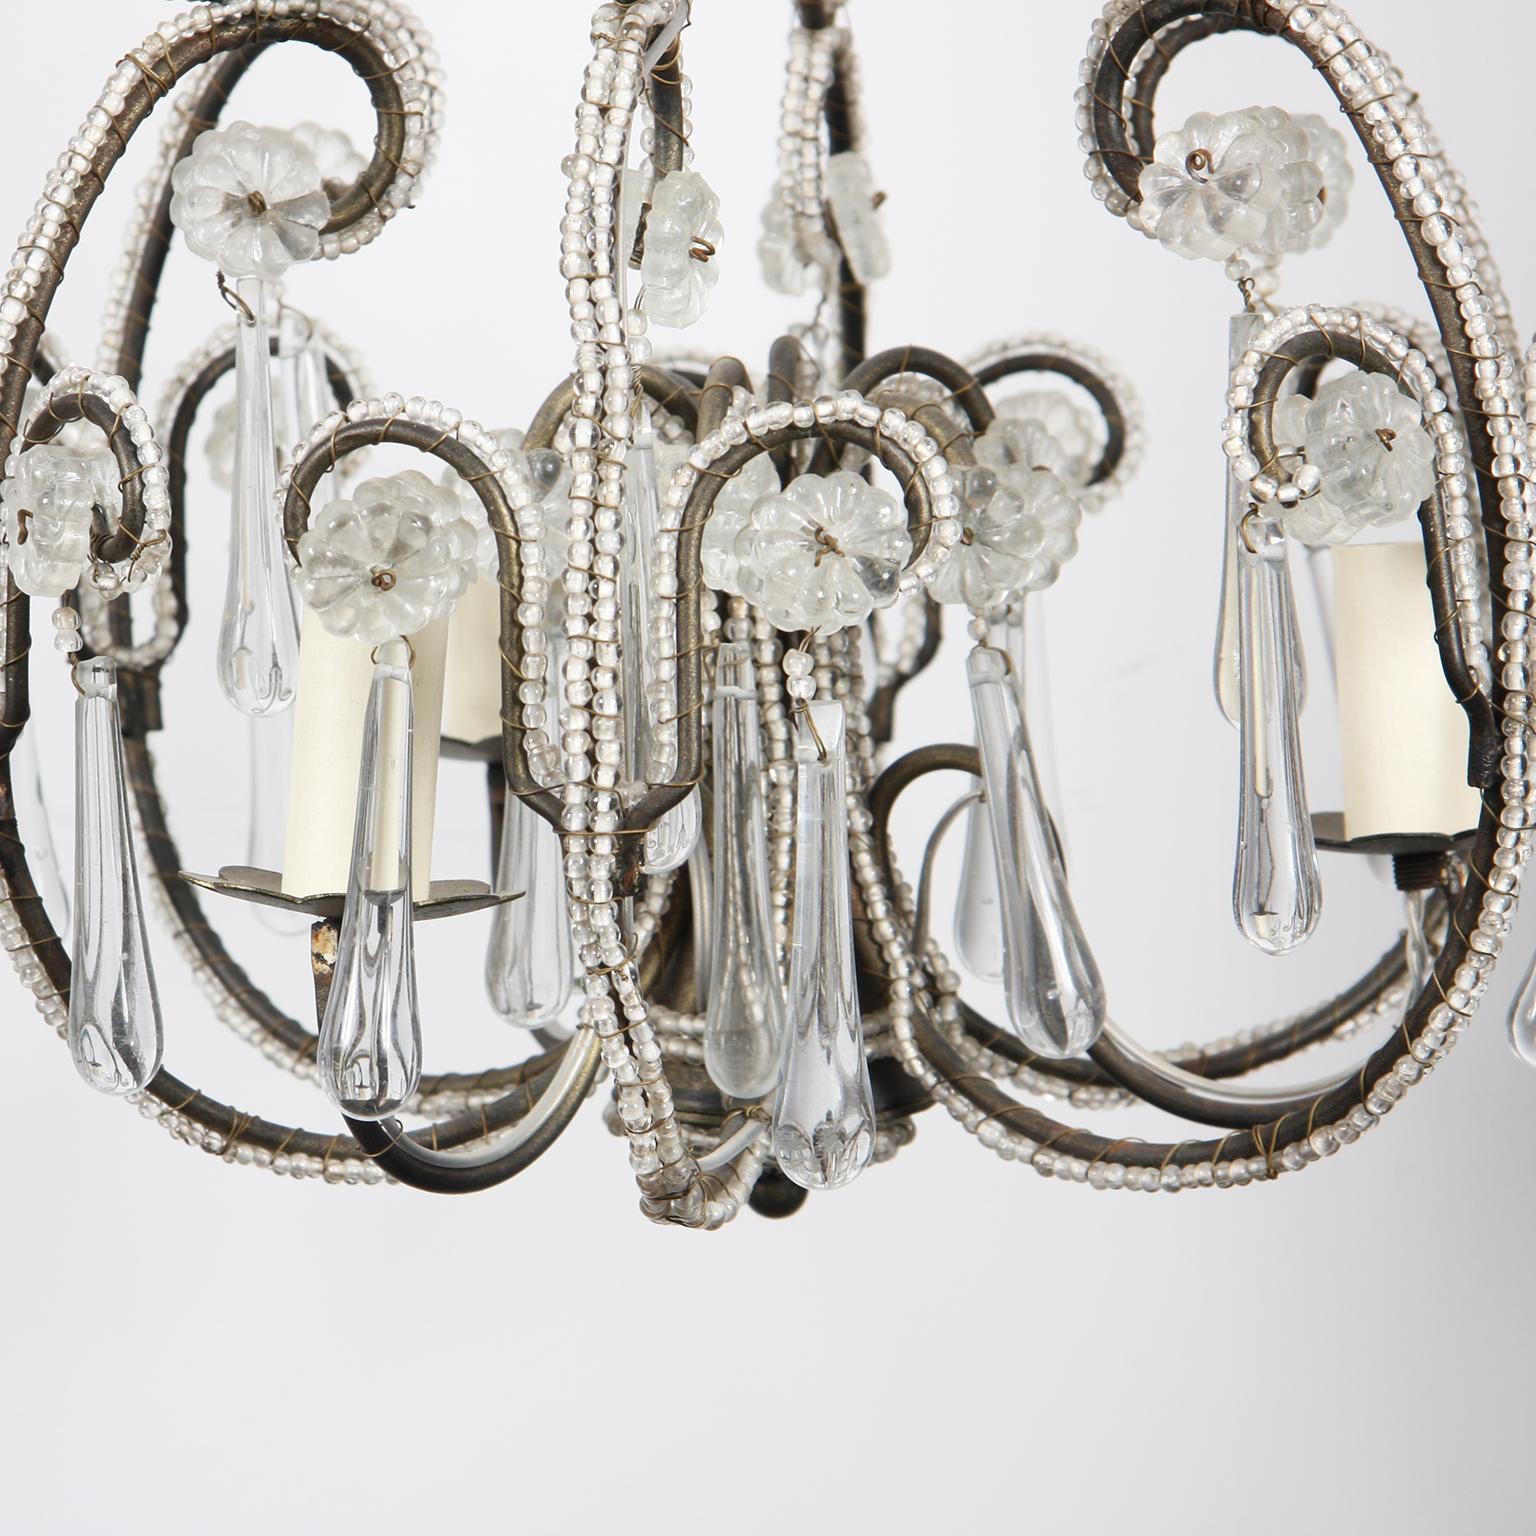 Italian, 1960s

A small, beaded, chandelier with a metal frame.